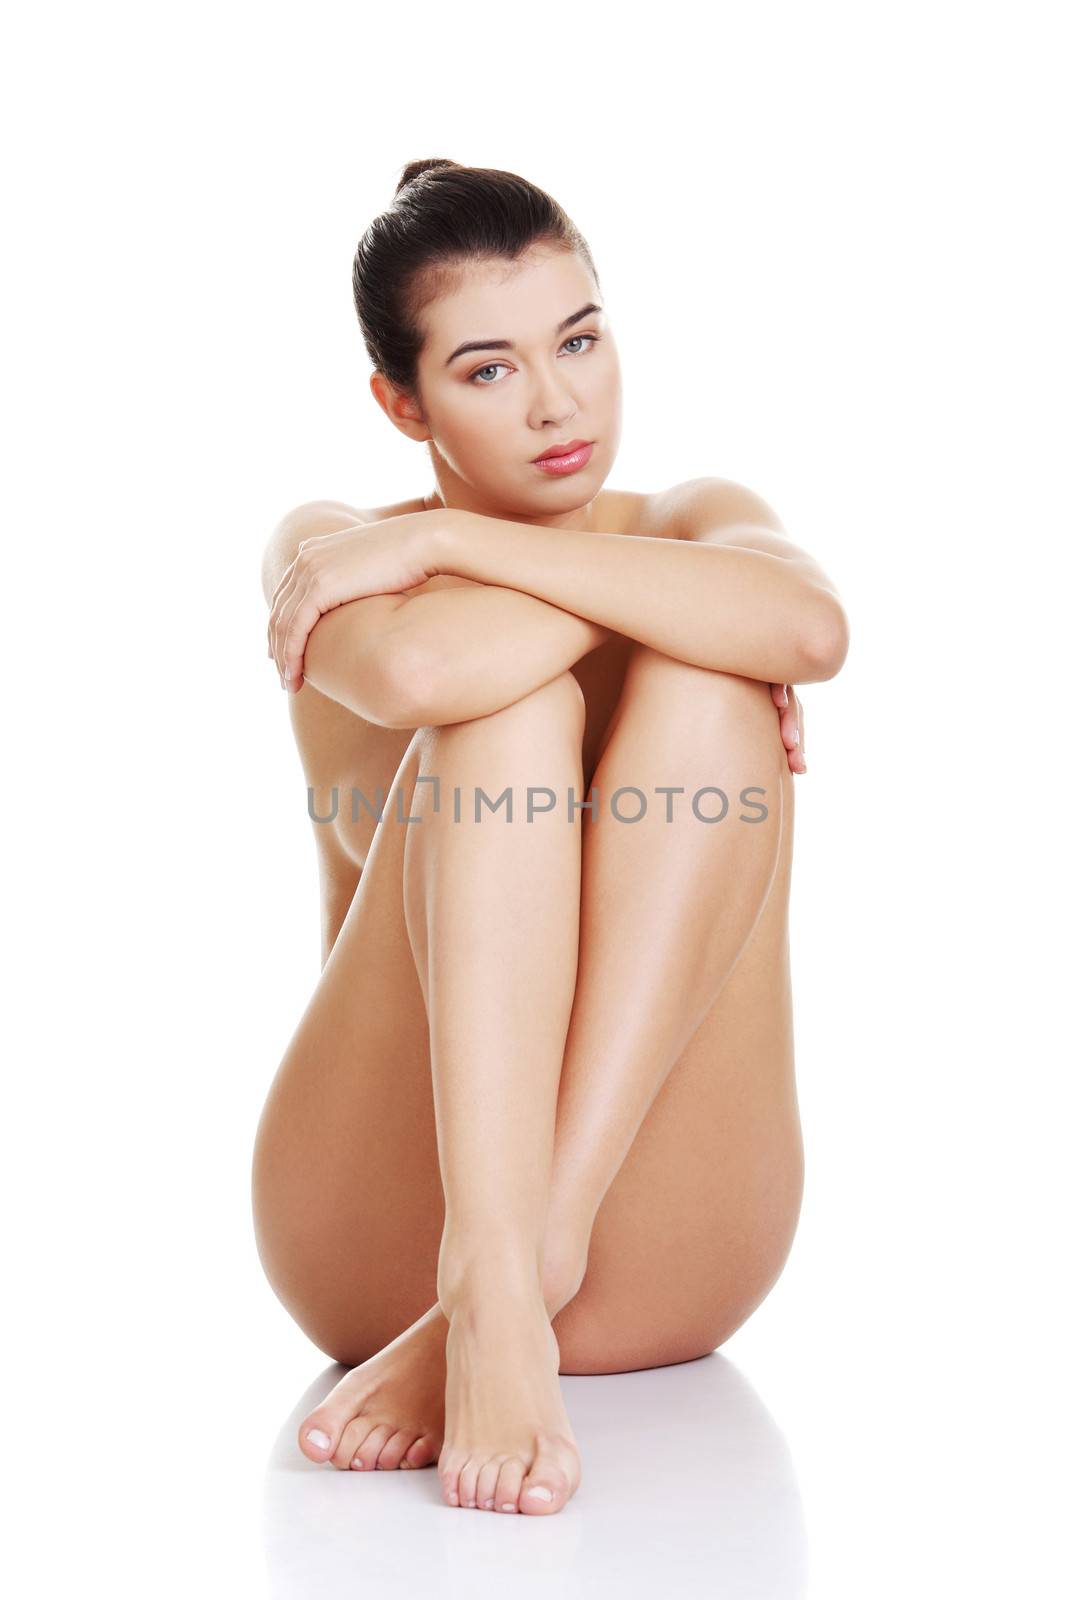 Sexy fit naked woman with healthy clean skin, isolated on white background